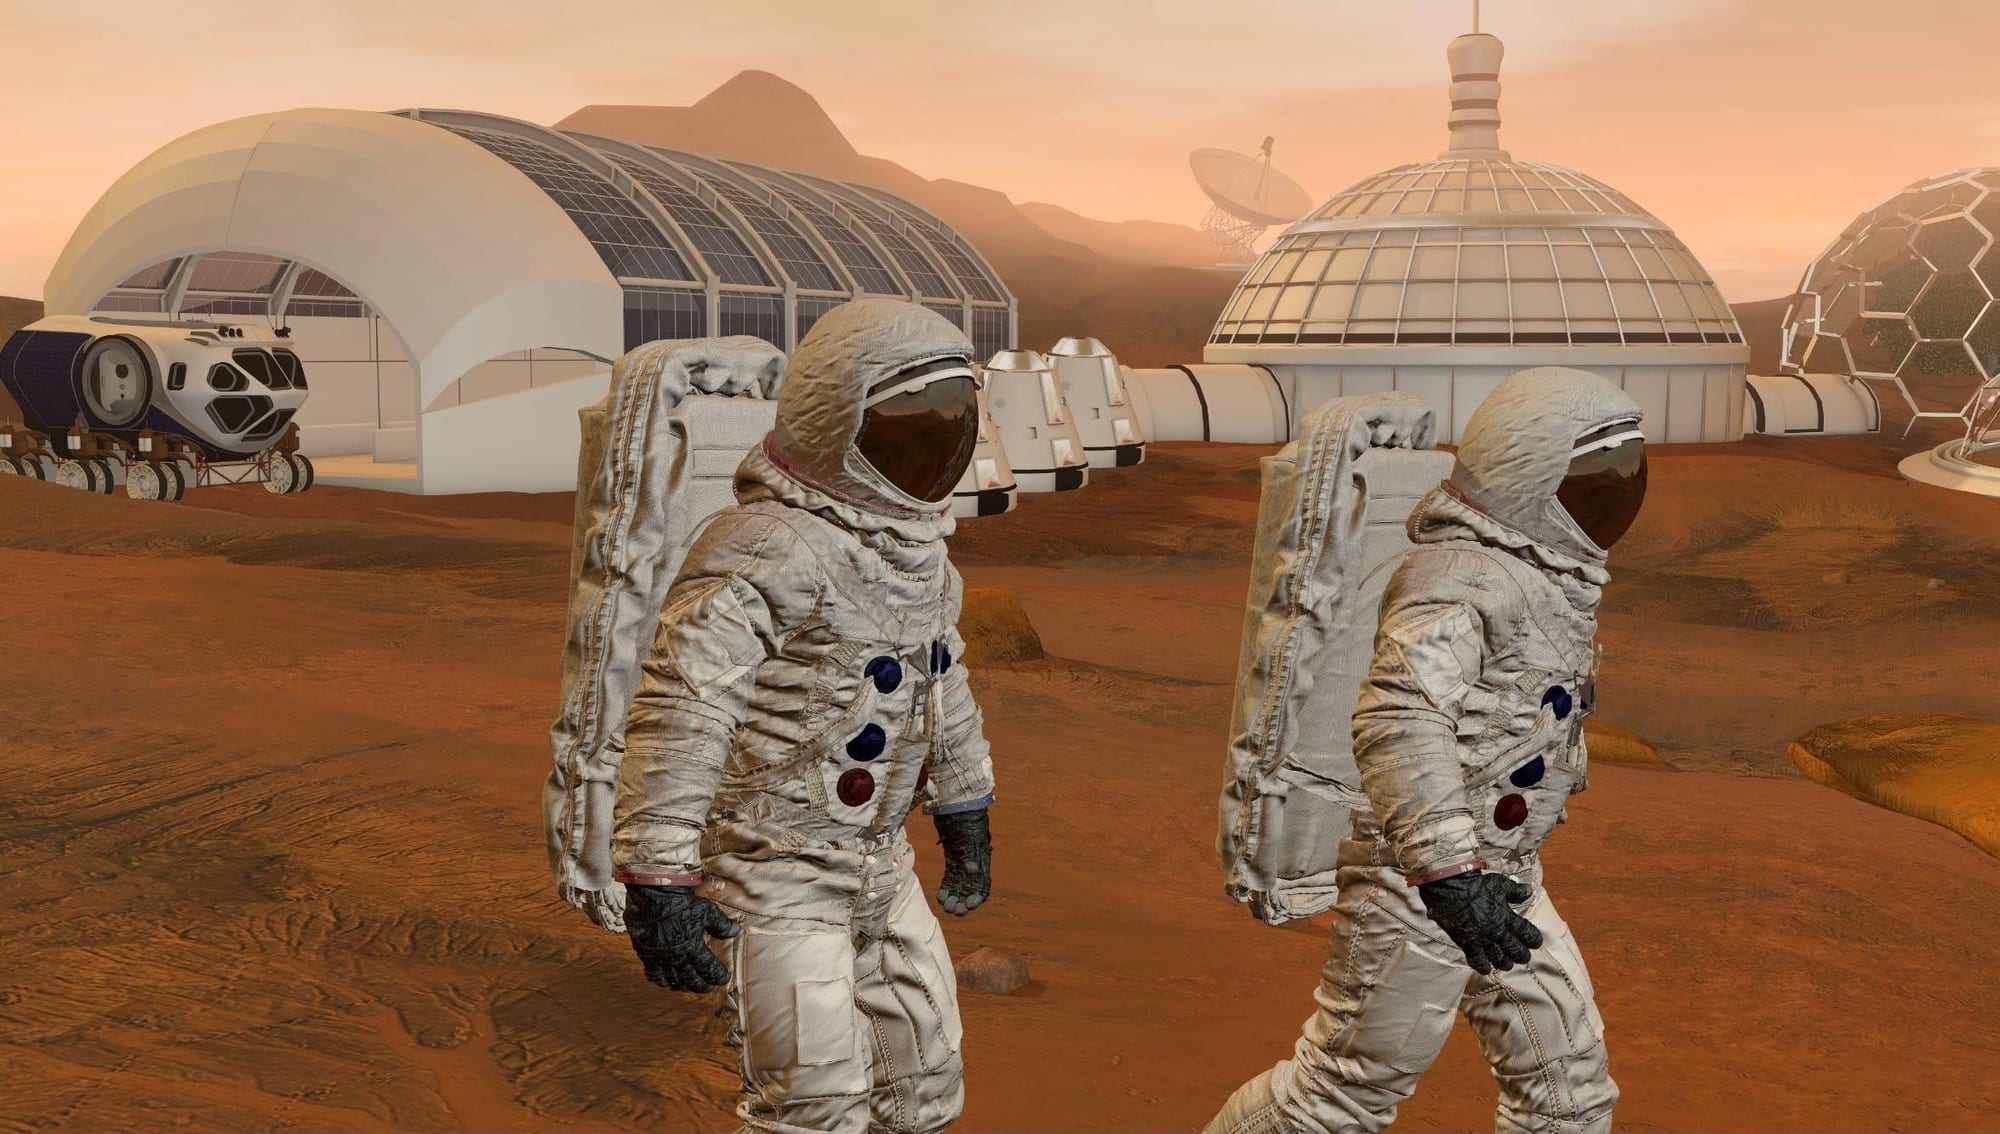 Computer rendering depicts astronauts walking through a futuristic Martian colony.